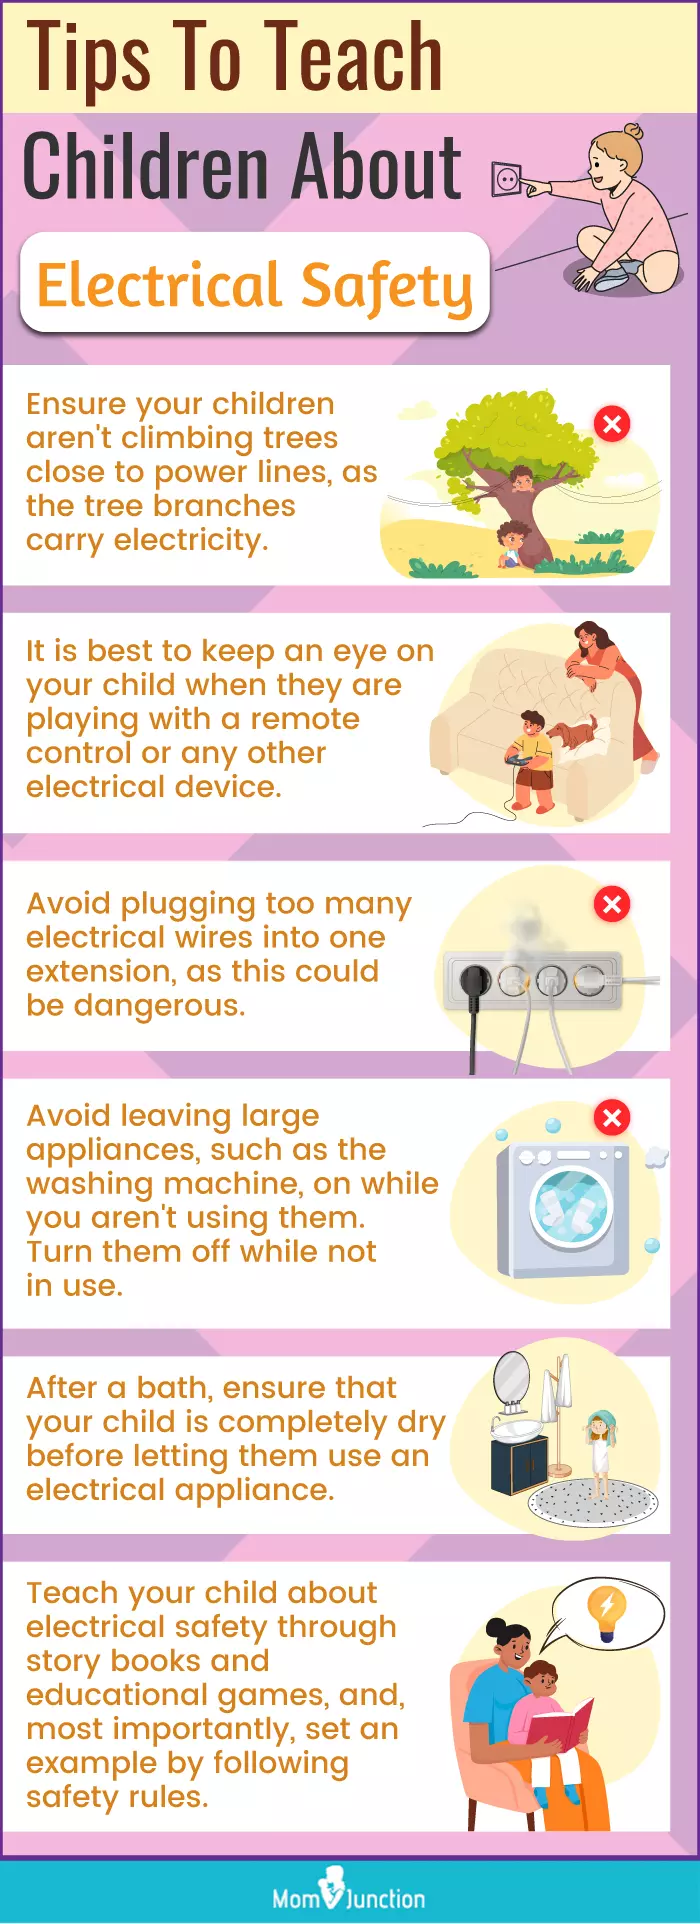 Tips To Teach Children About Electrical Safety (infographic)